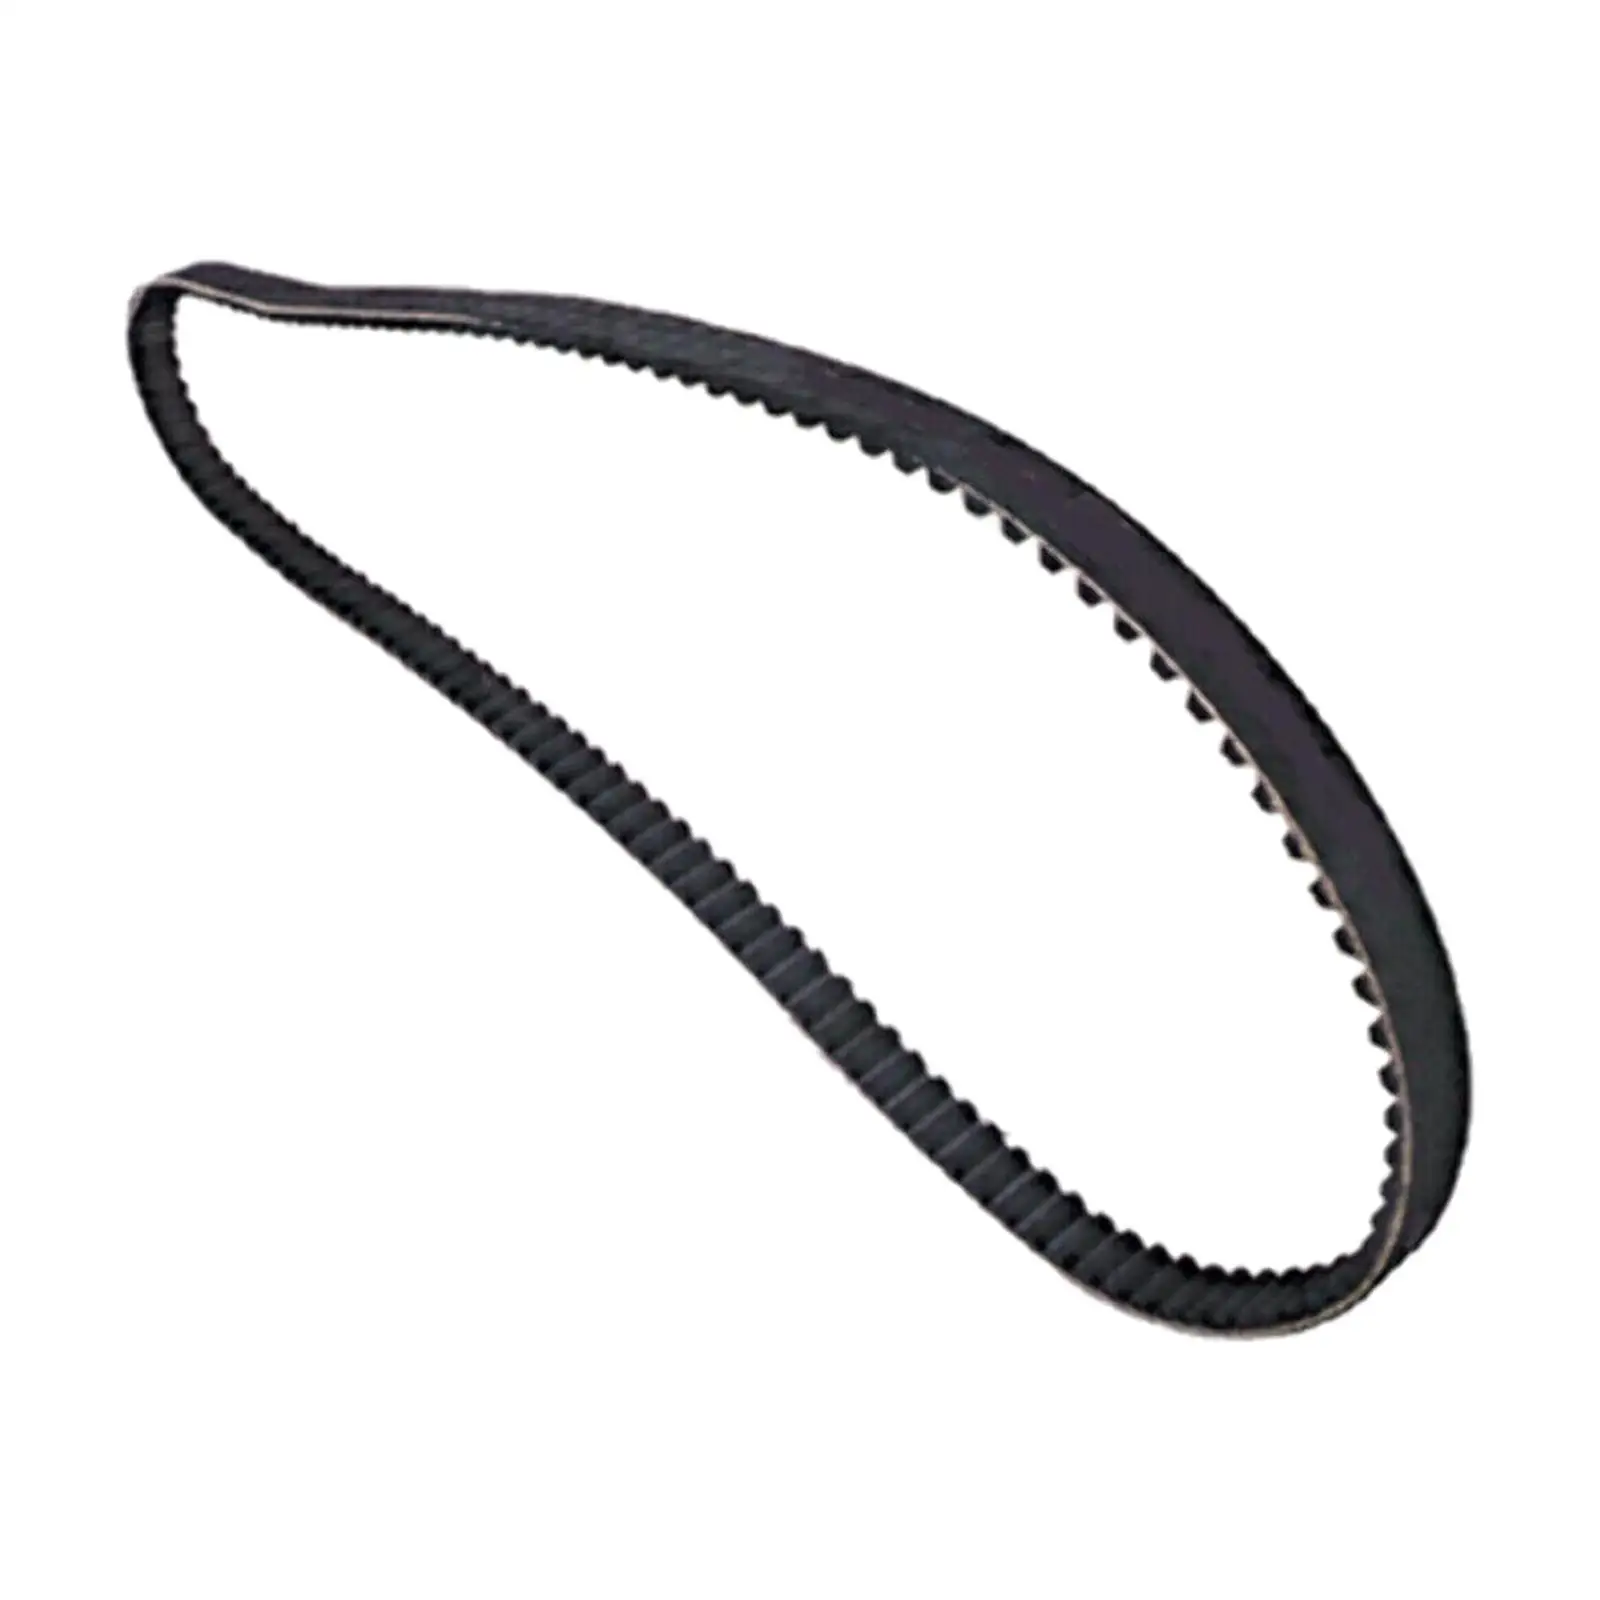 Rear Drive Belt Rubber Motorcycle Accessories 133 Tooth 1 1/8